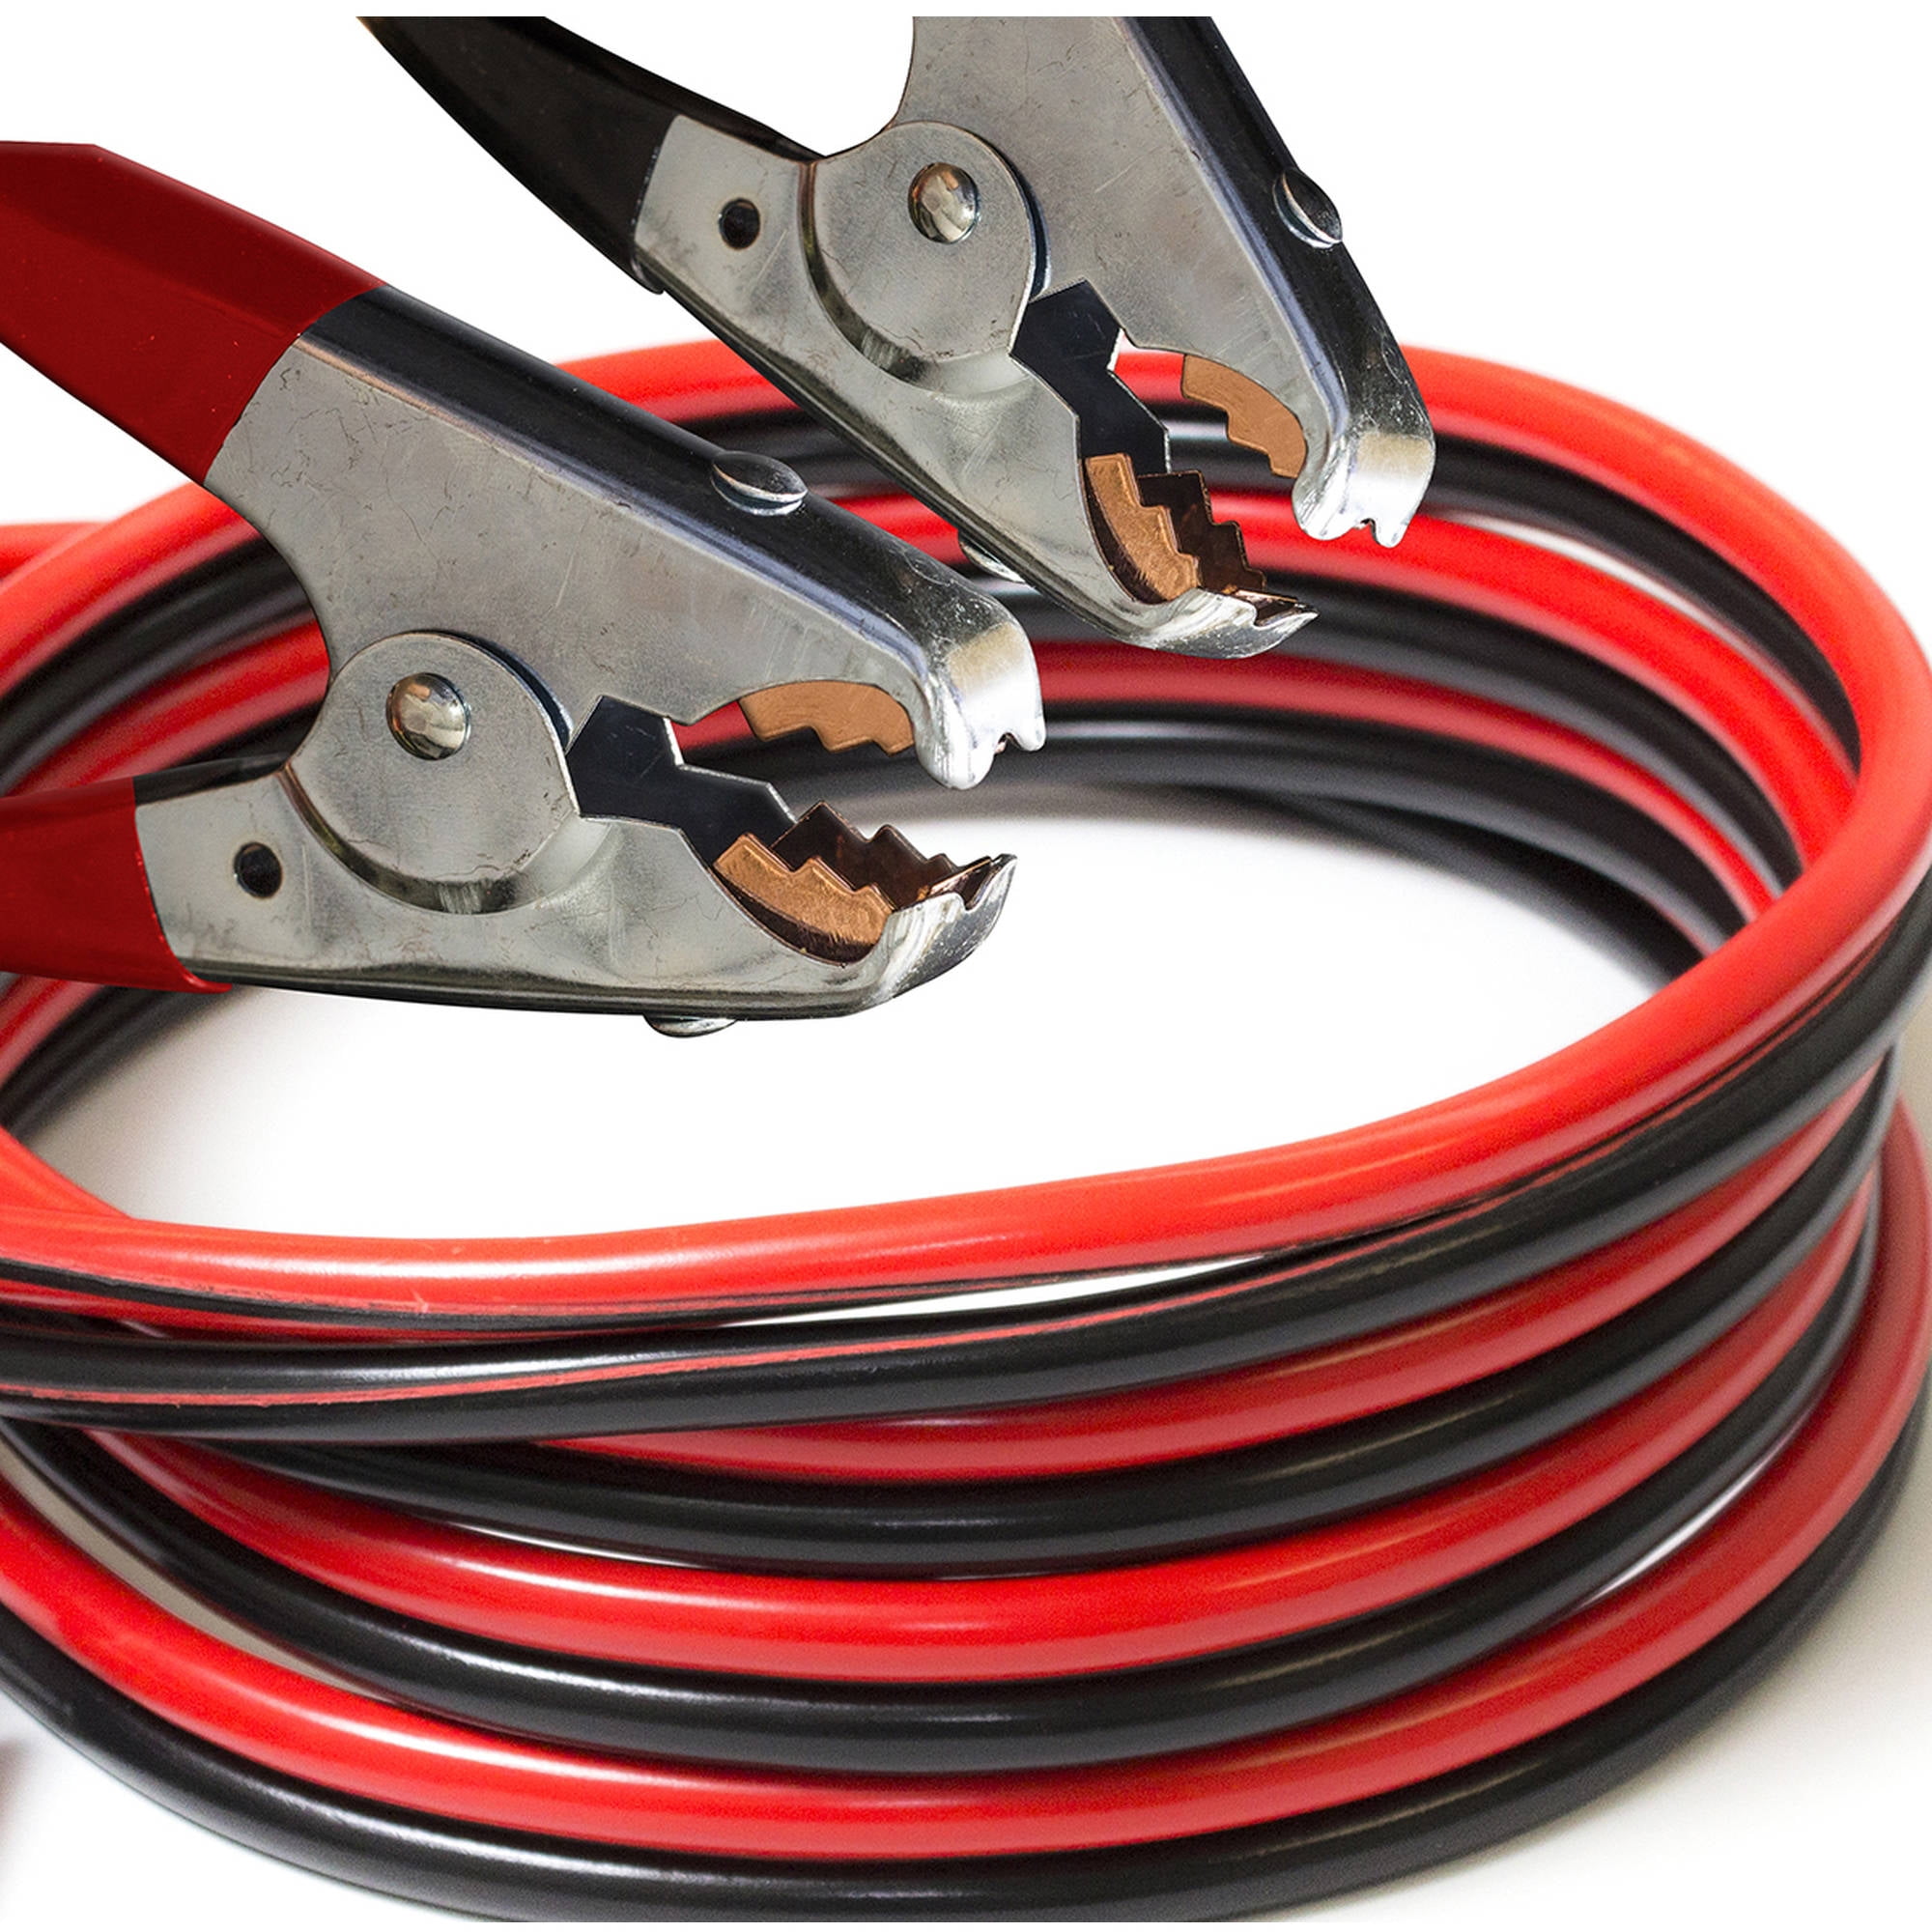 13ft 4 Gauge 500 AMP Quality Booster Jumper Cable Emergency Power Start LY 